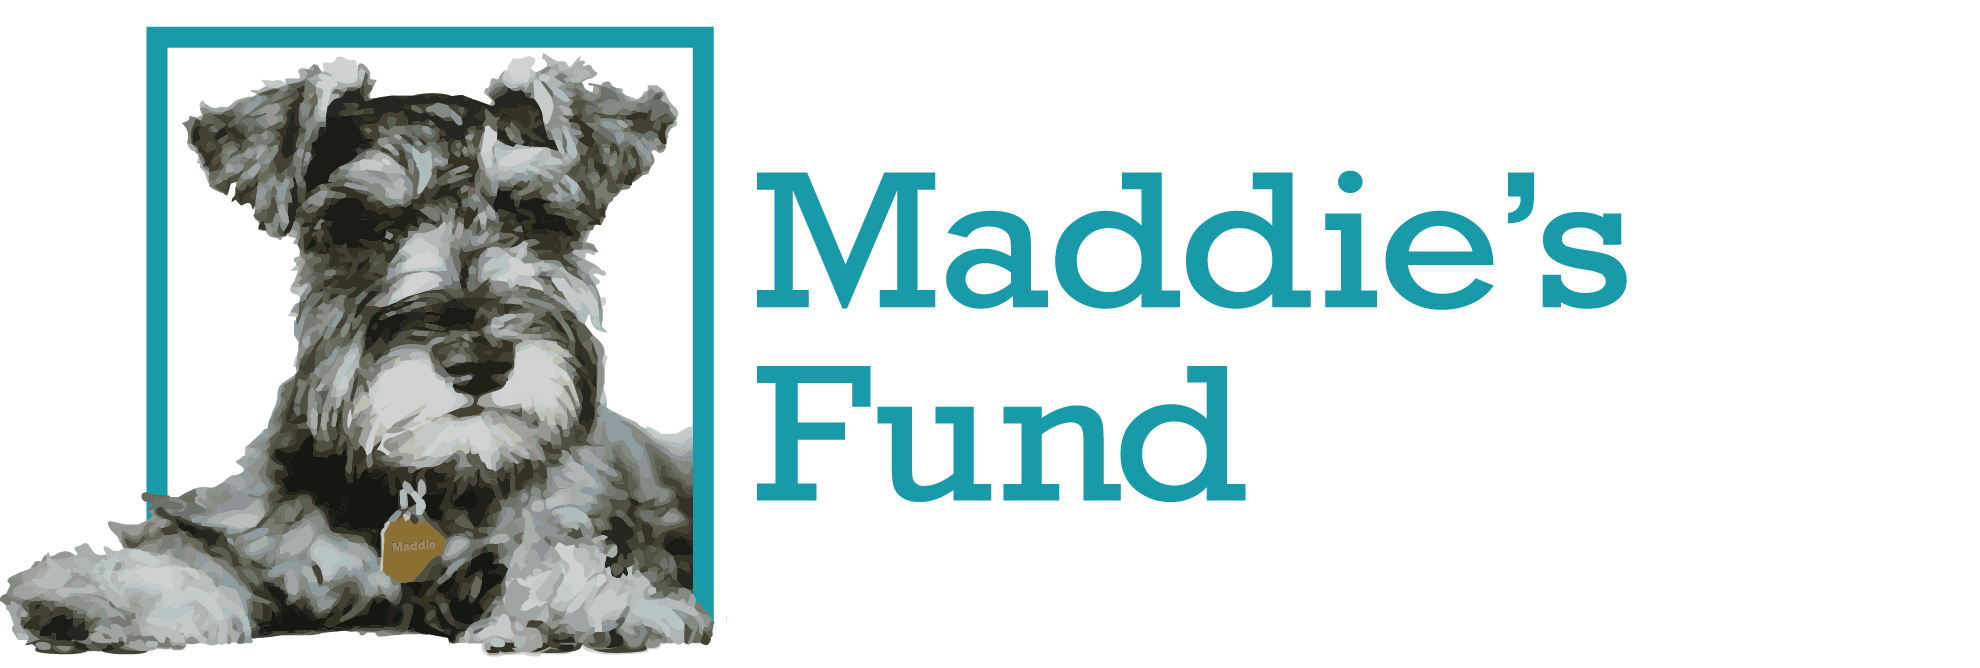 Maddie's Fund gift to Beautiful Together